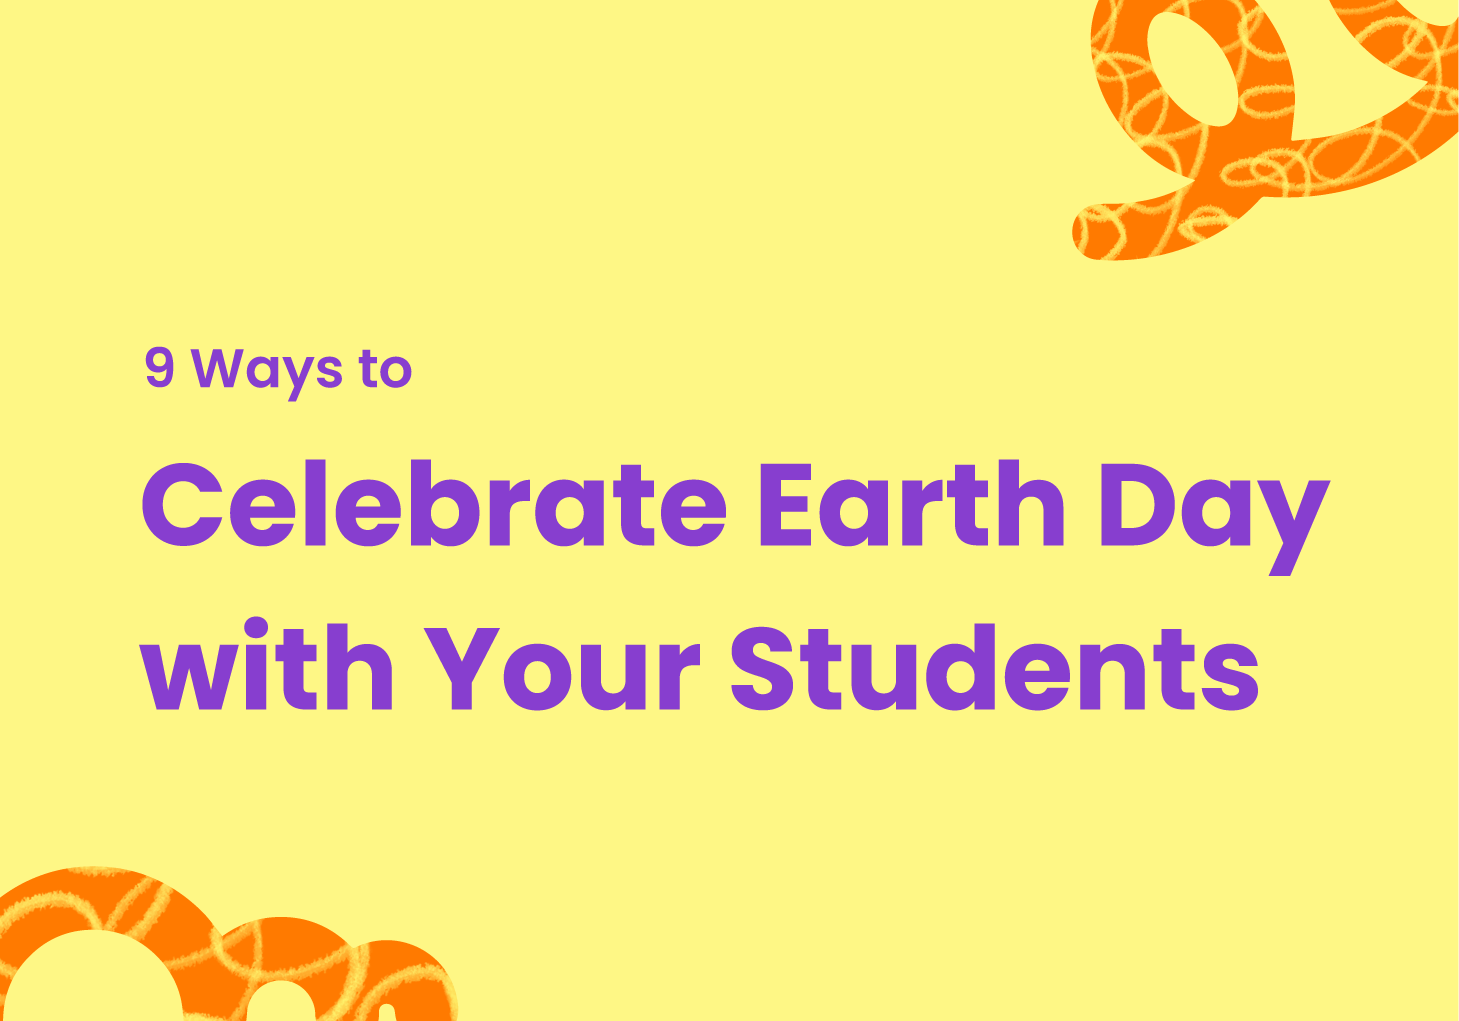 9 Ways to Celebrate Earth Day With Your Students